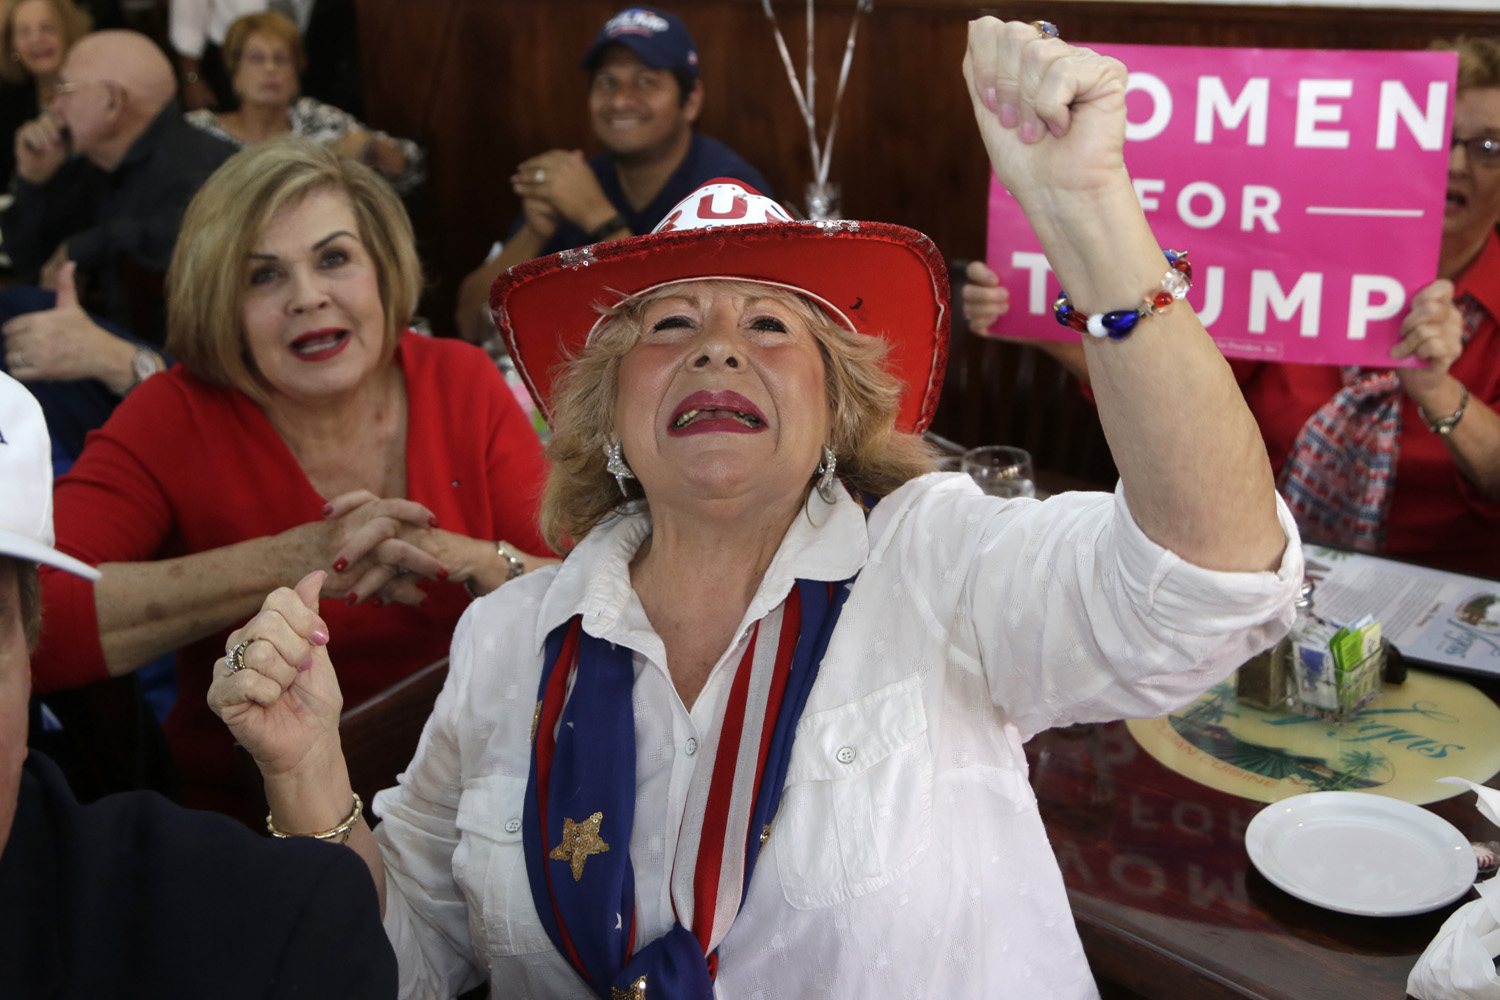 Martie Mees cheers as she watches a televised broadcast of the presidential inauguration of Donald Trump during a watch party organized by Hispanas for Trump, in Miami. (Lynne Sladky/AP)